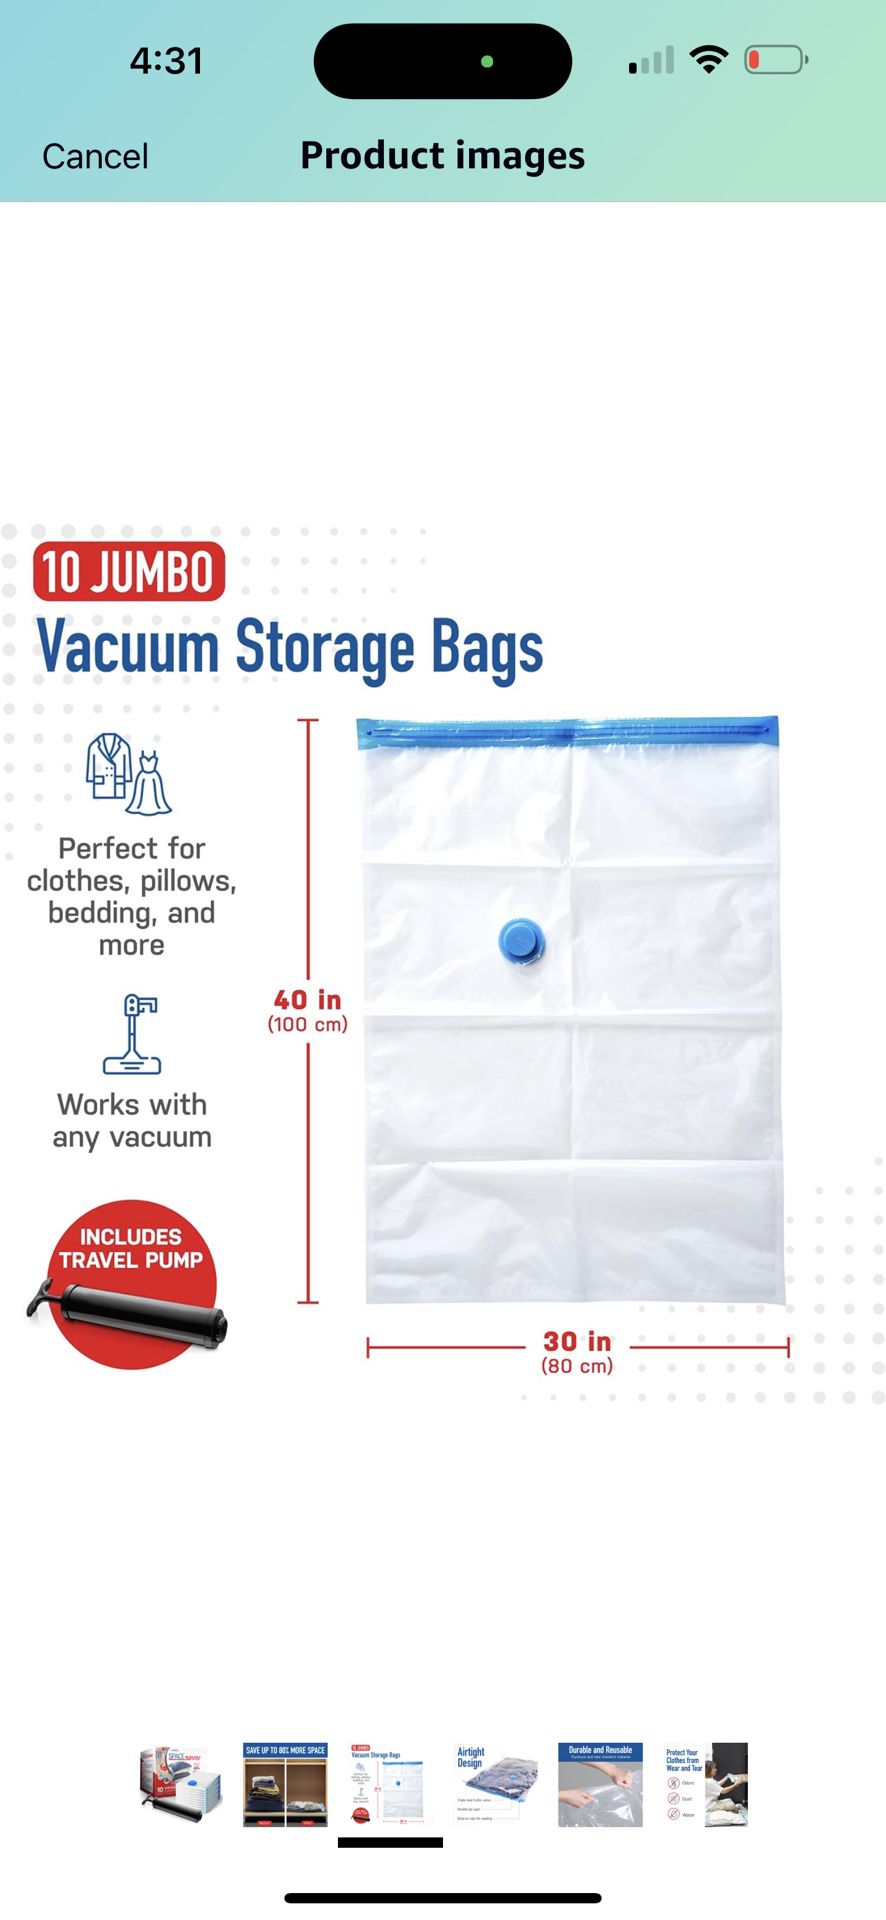 Spacesaver Space Bags Vacuum Storage Bags (Jumbo 10pk) Save 80% Clothes Storage Space - Vacuum Bags for Comforters, Blankets, Bedding, Clothing - Comp